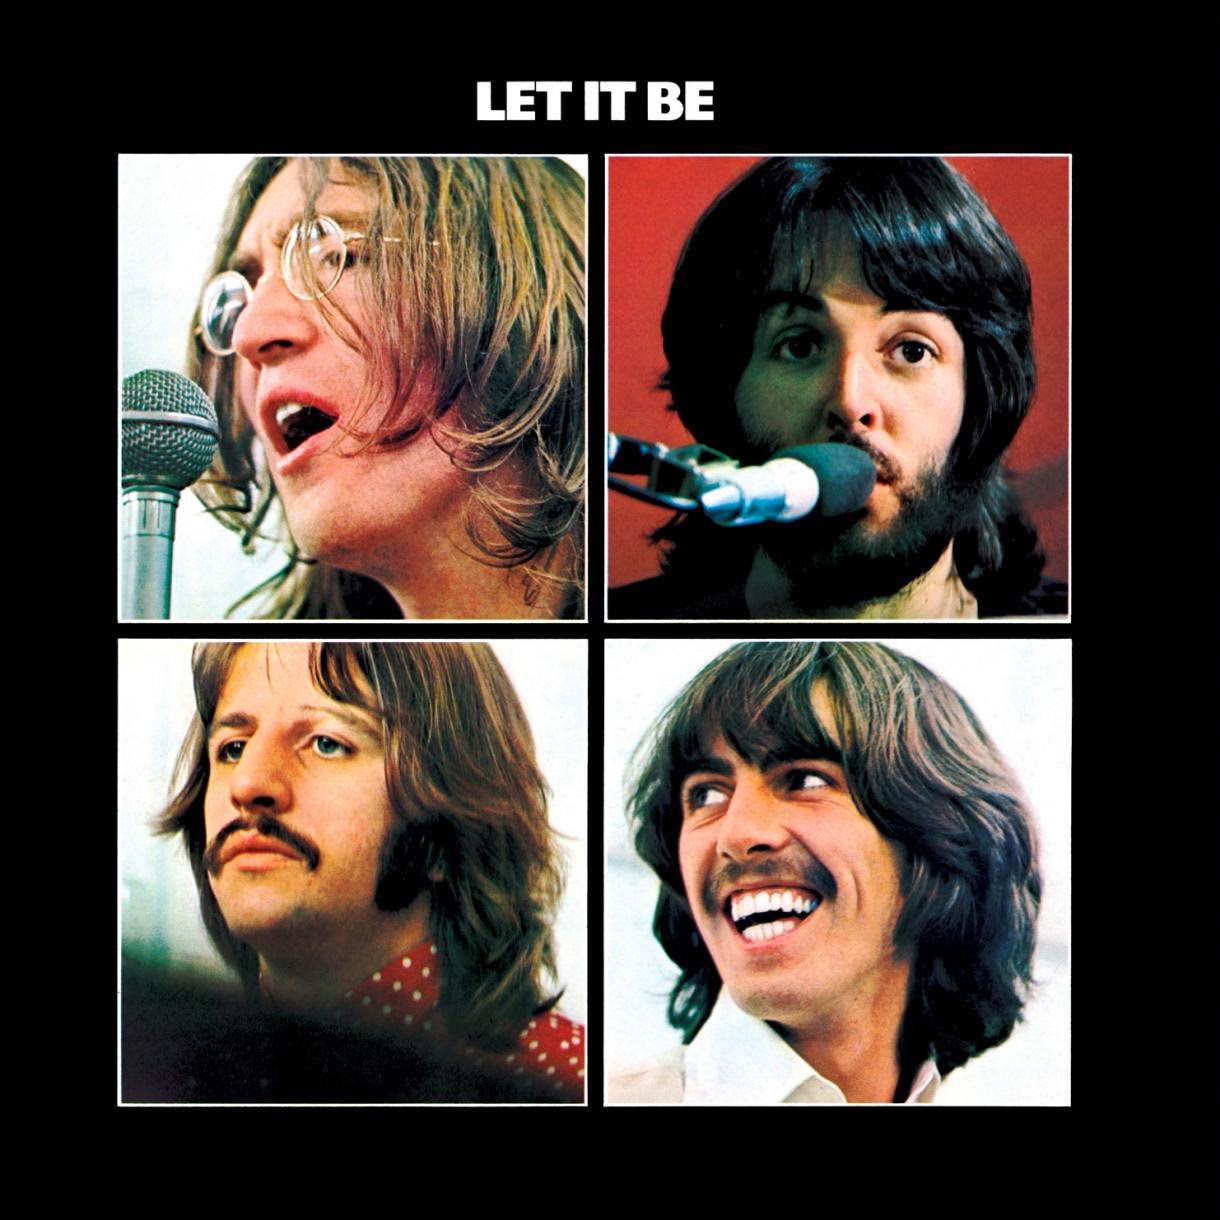 The Daily Beatle: Album covers: Let It Be